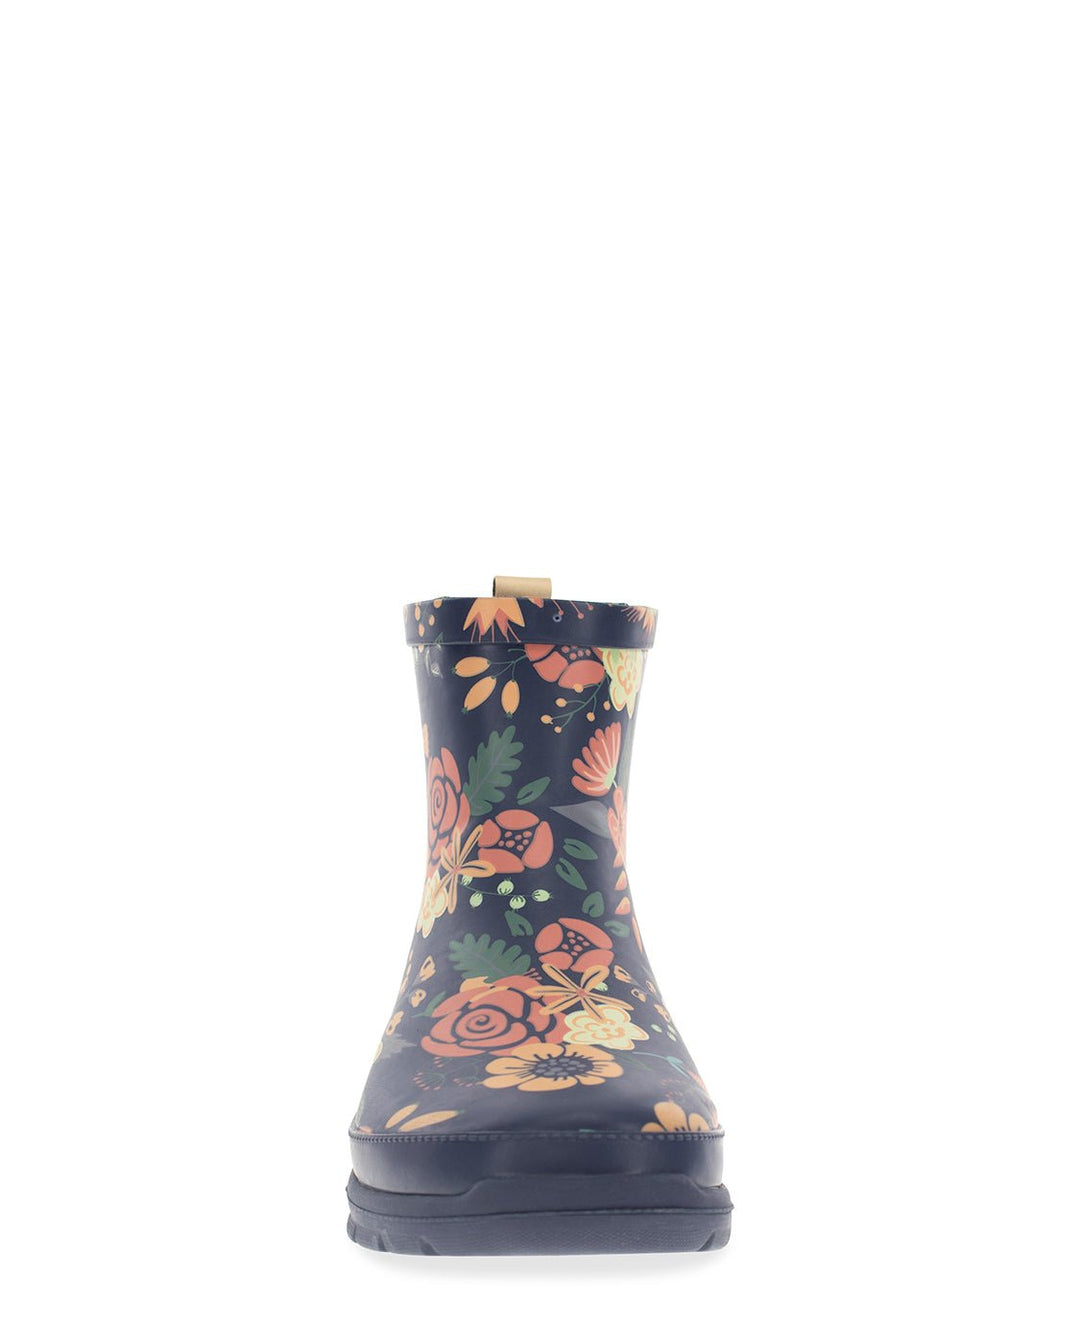 Women's Bloomer Ankle Rain Boot - Navy - Western Chief